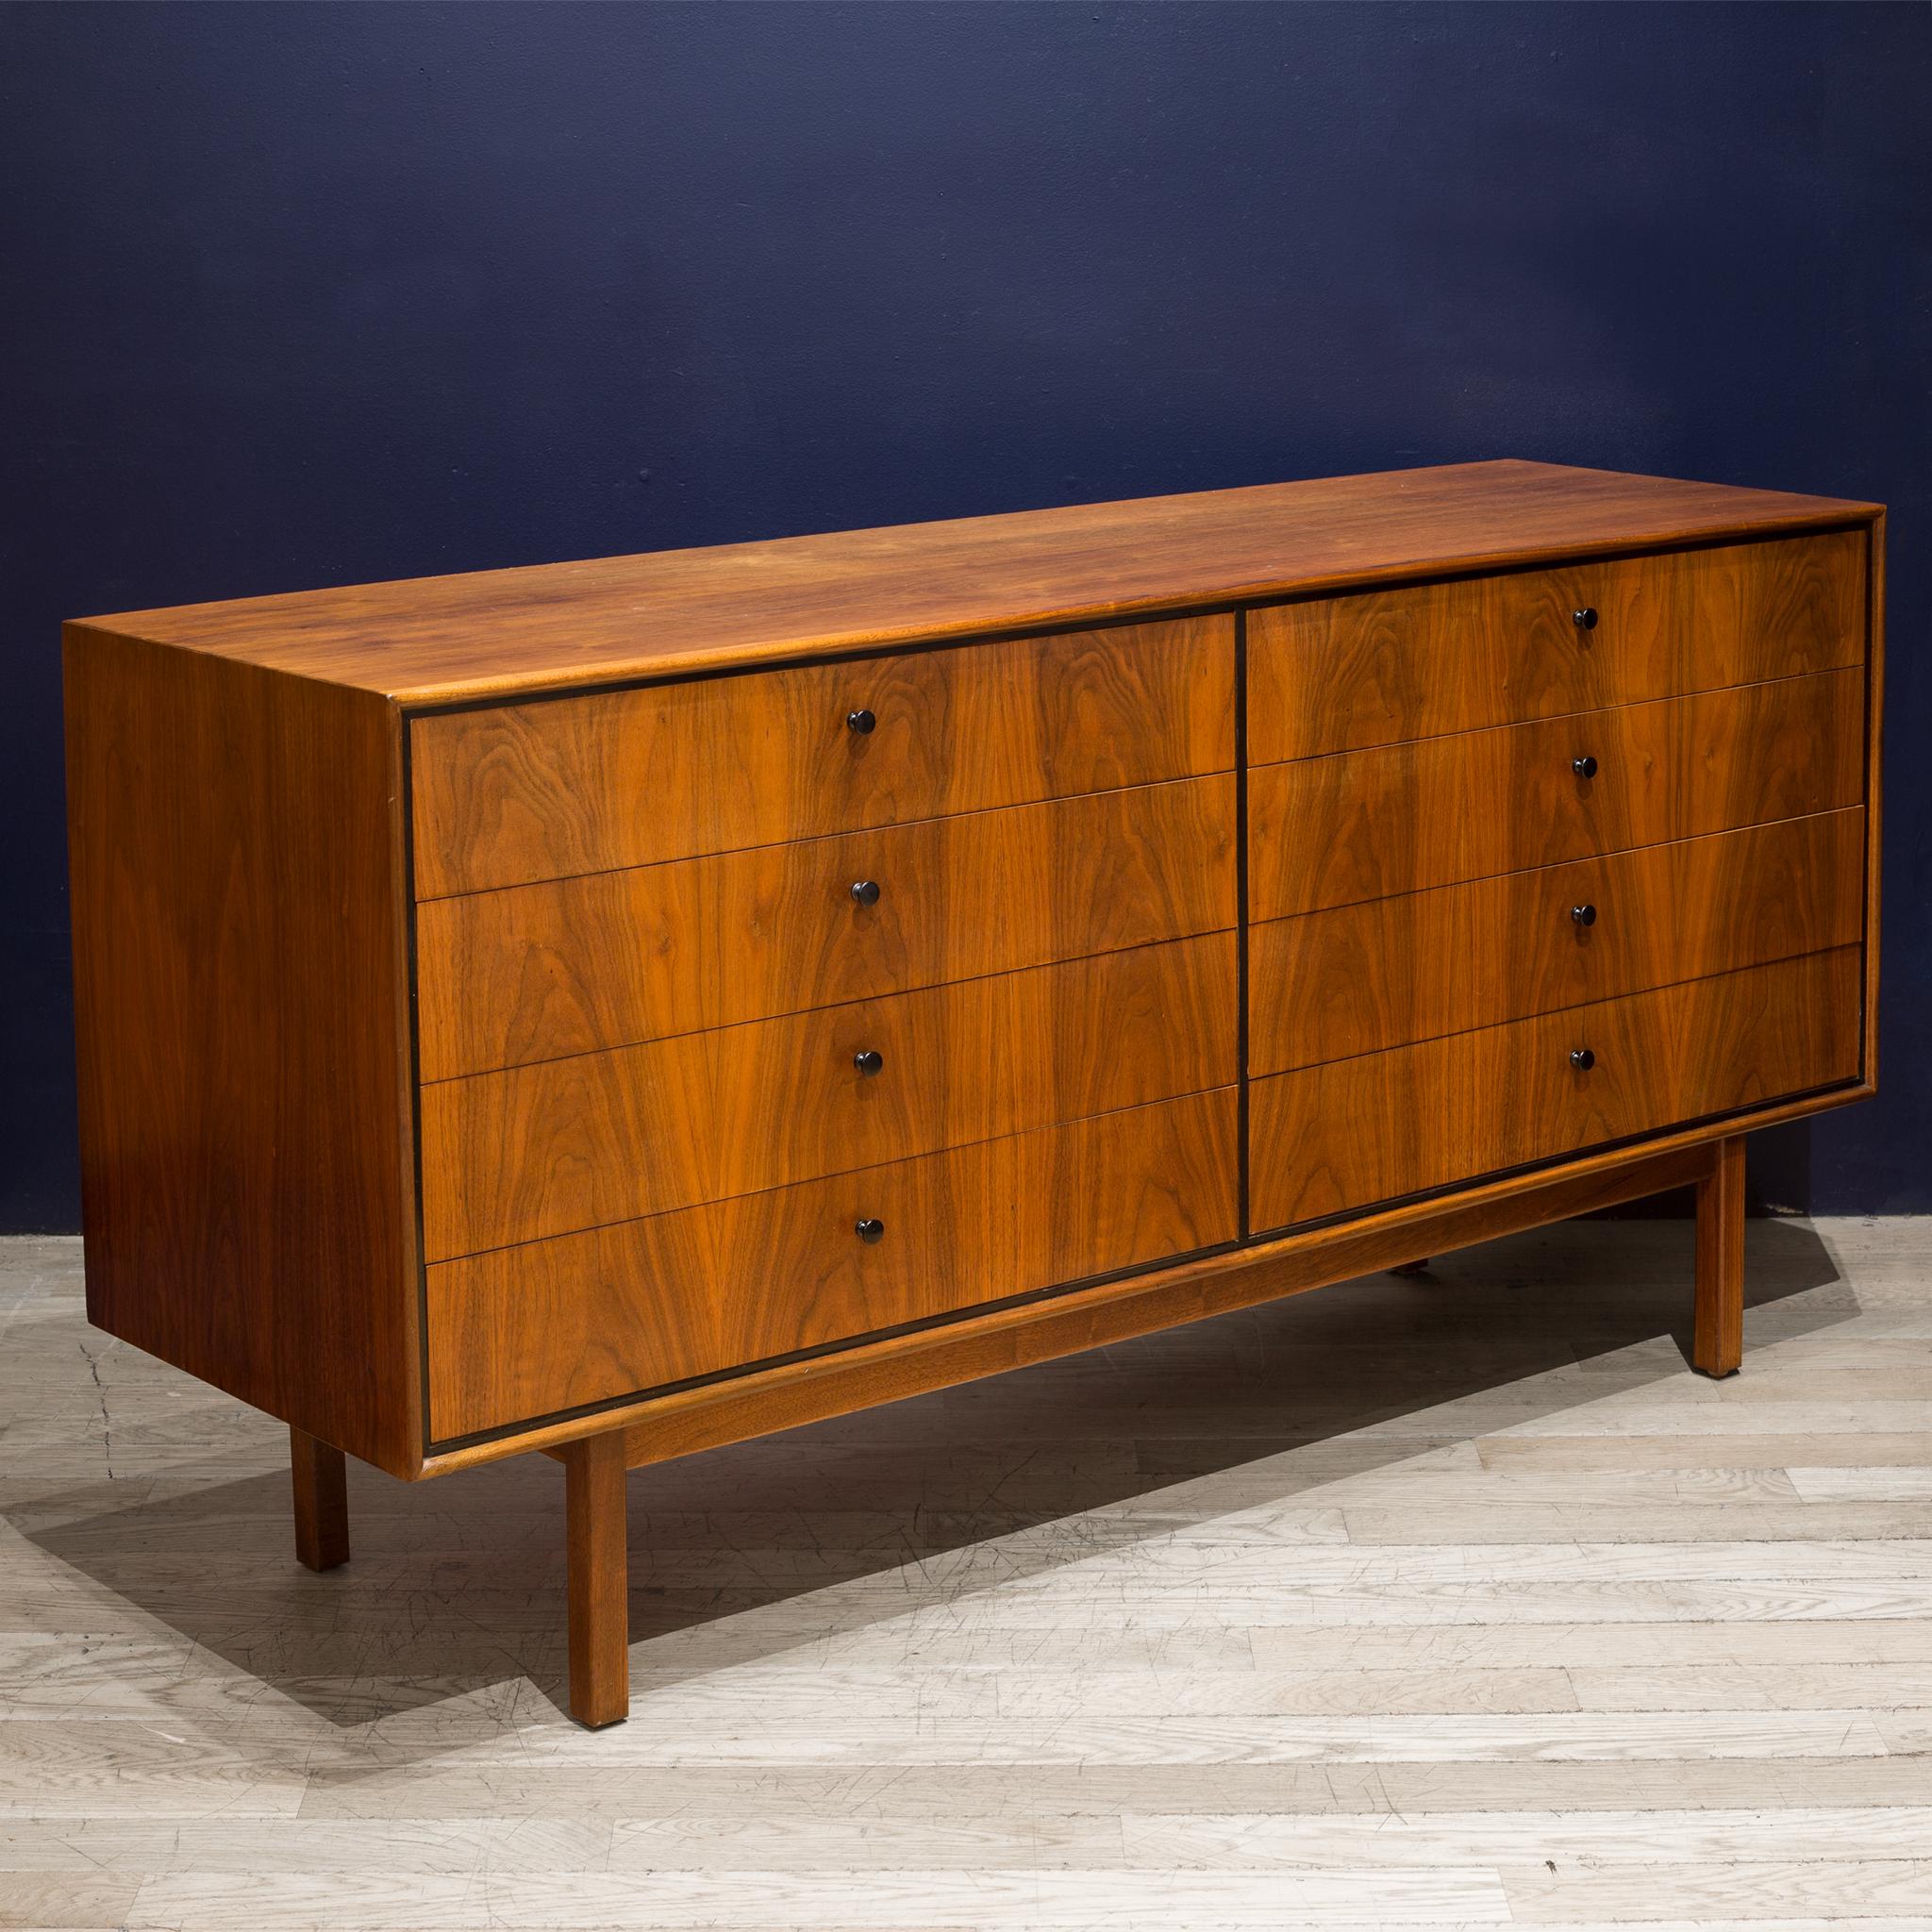 American Midcentury Jack Cartwright for Founders Dresser, circa 1960